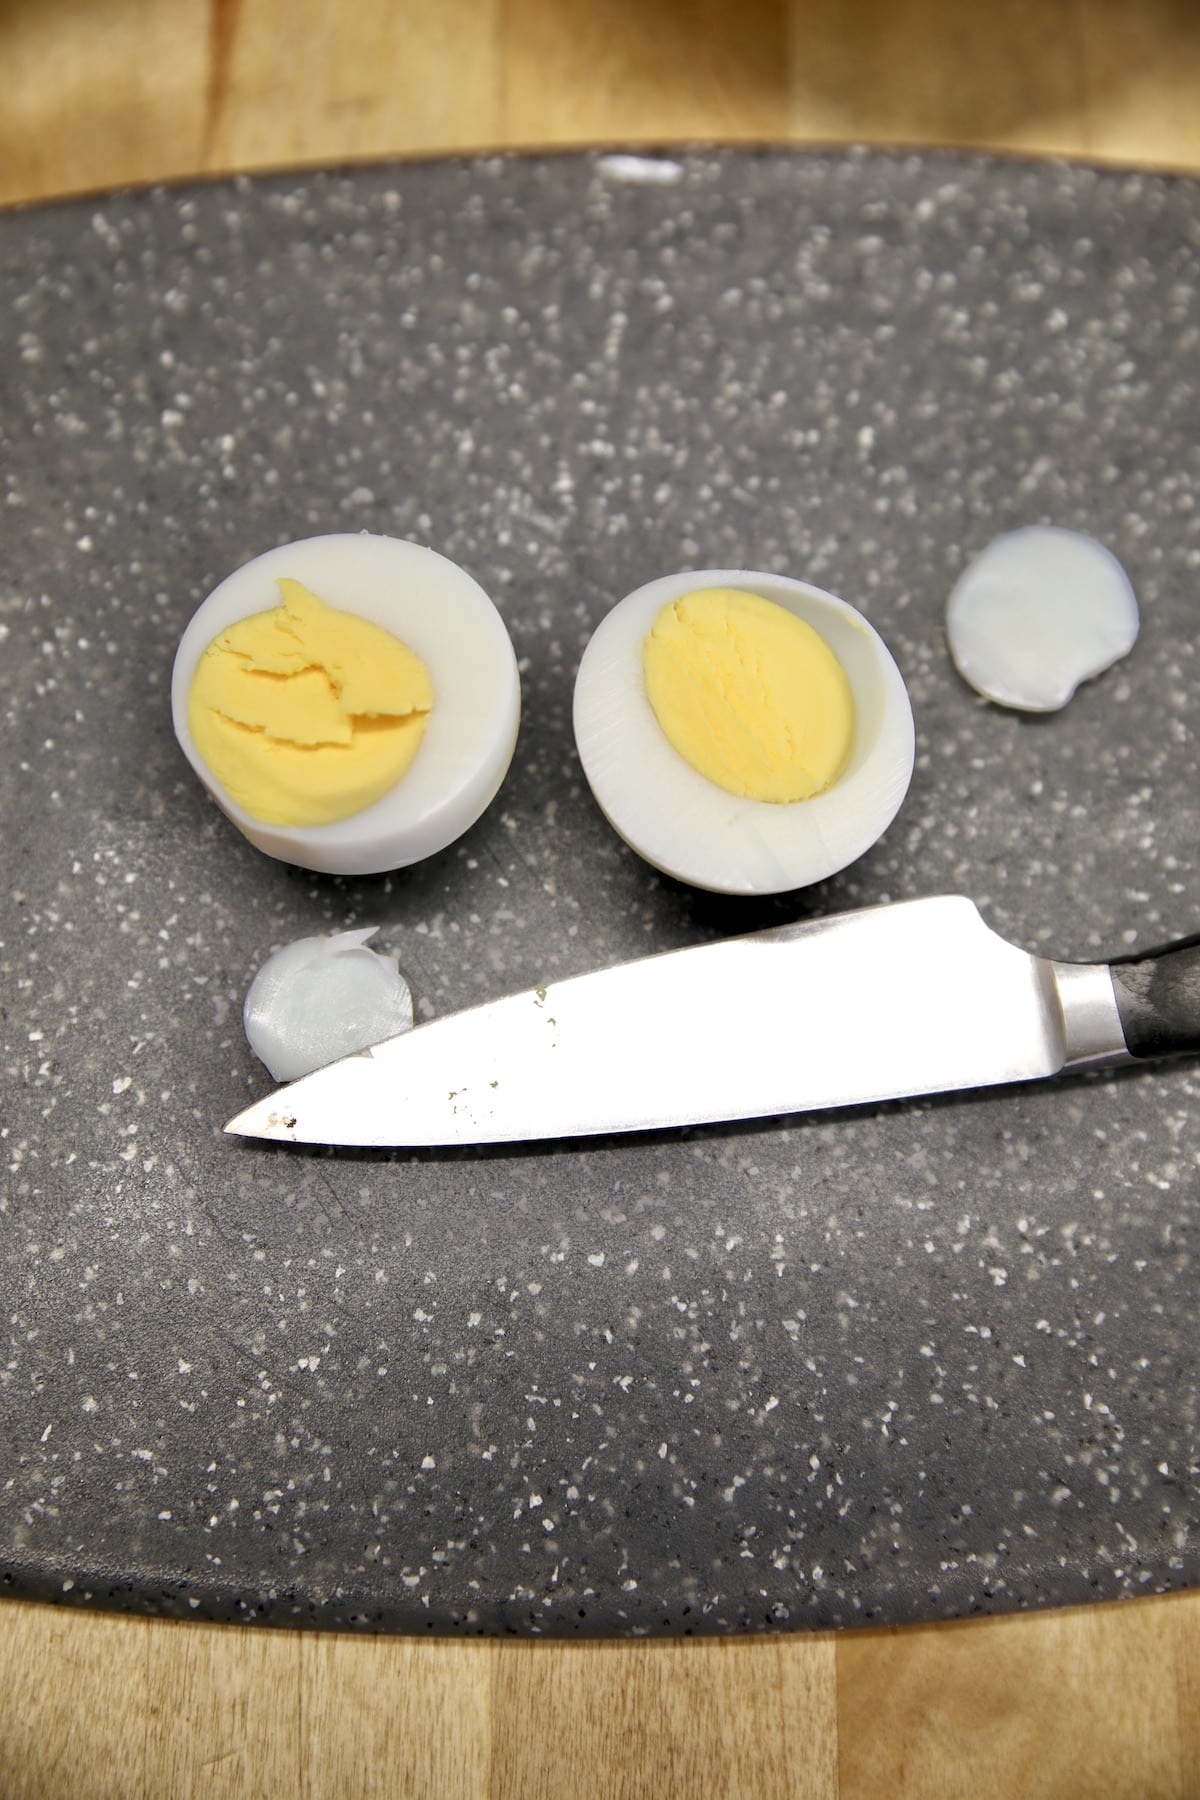 Hard boiled egg cut in half with ends removed. 